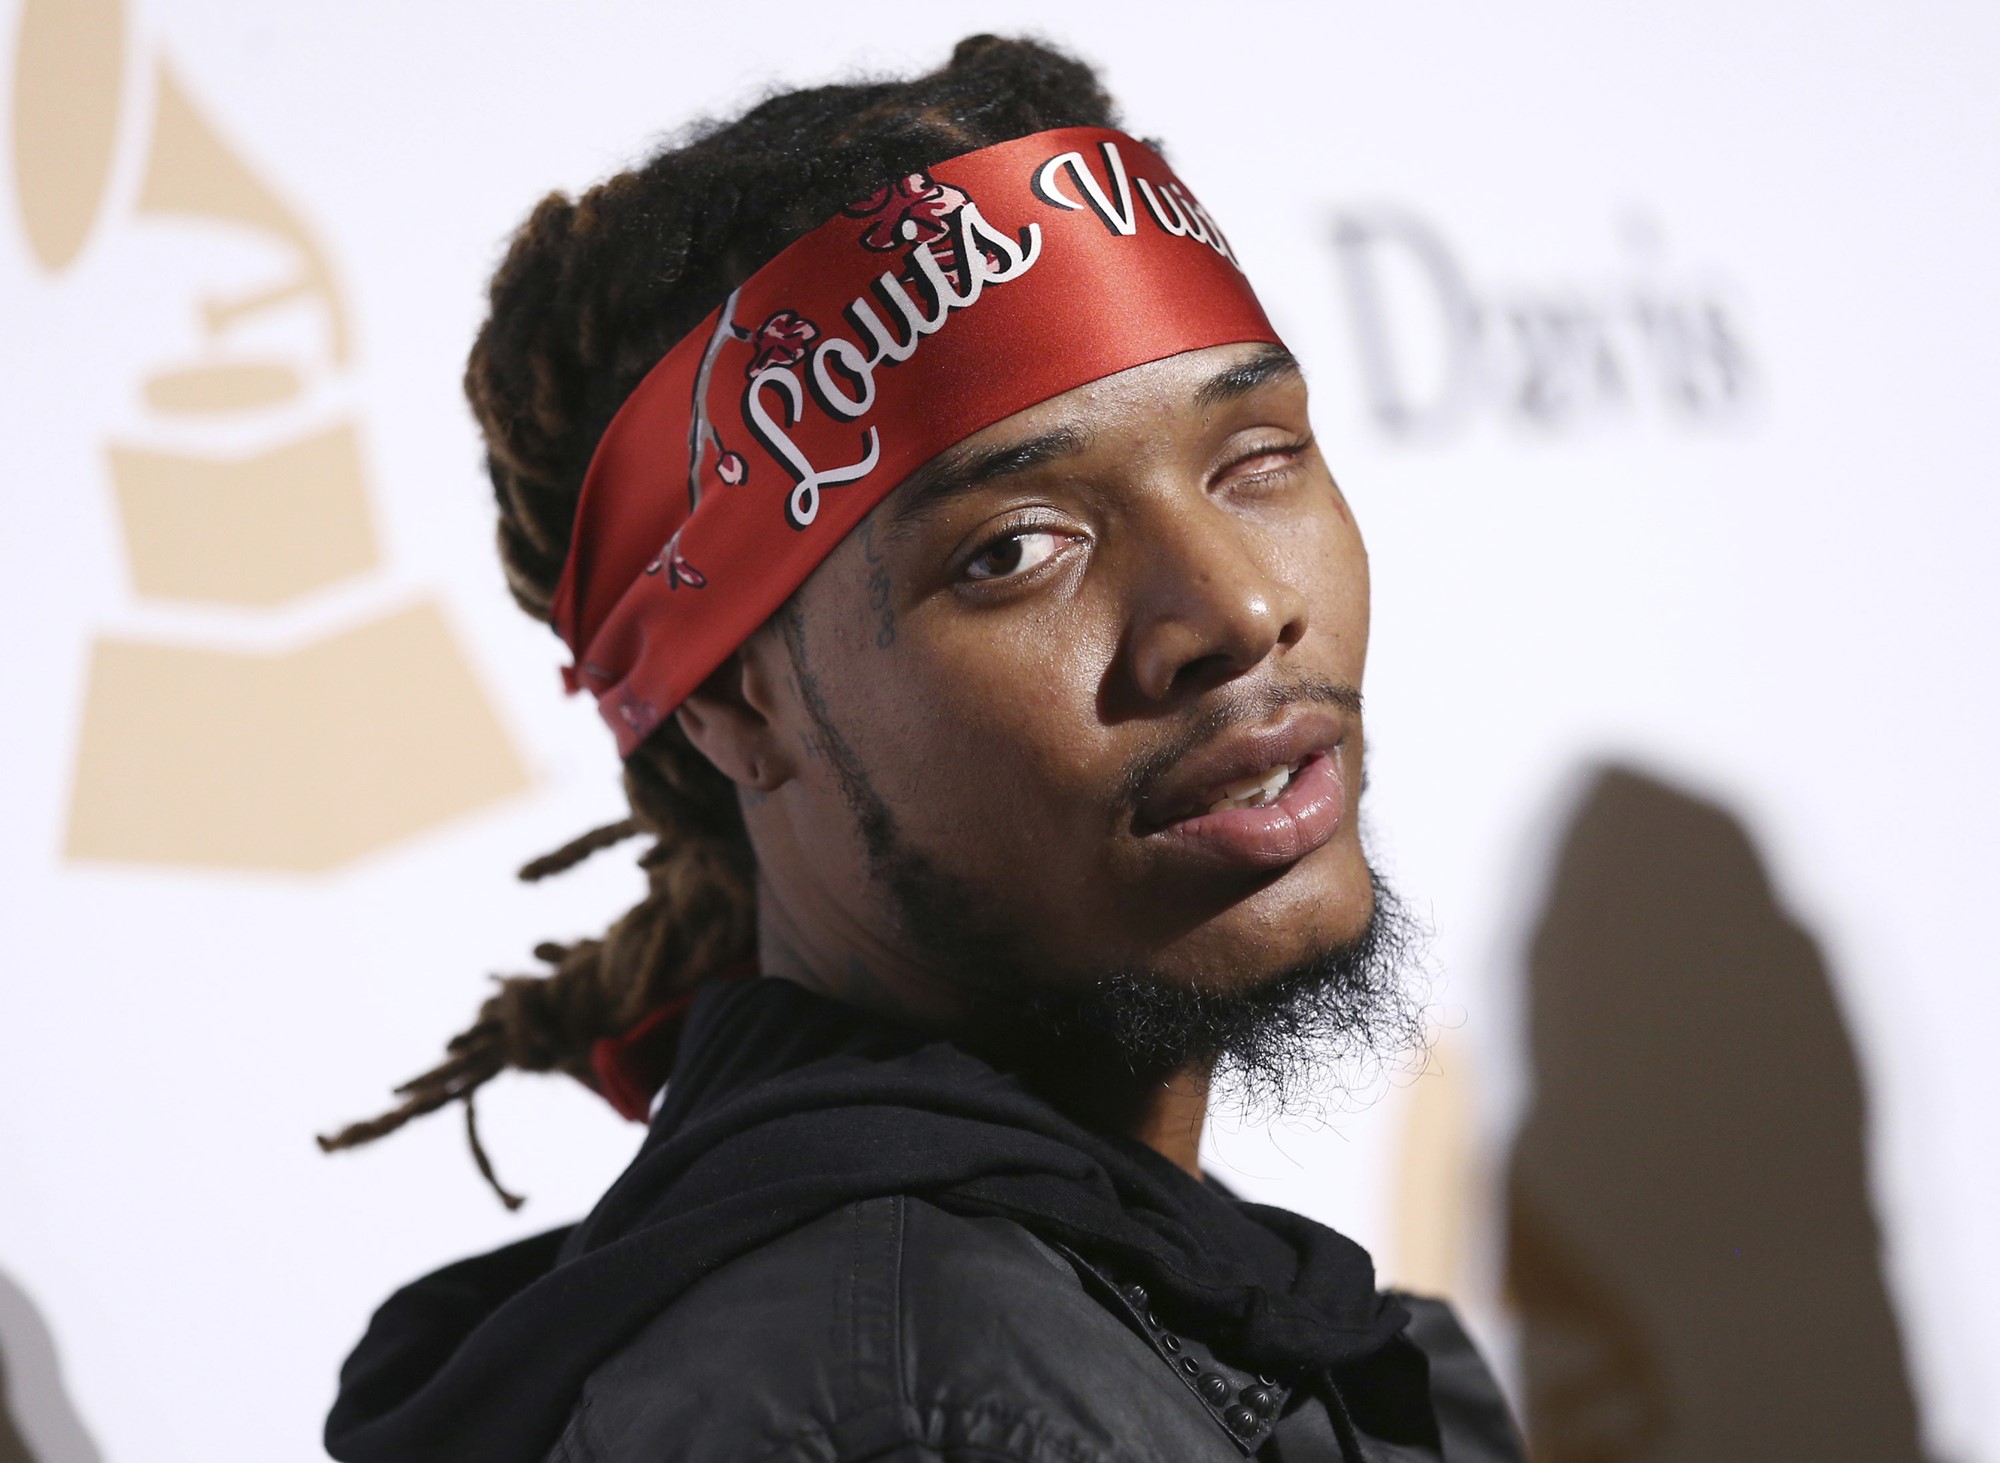 Rapper Fetty Wap, wearing a bandana, looks at the camera on a Grammys red carpet